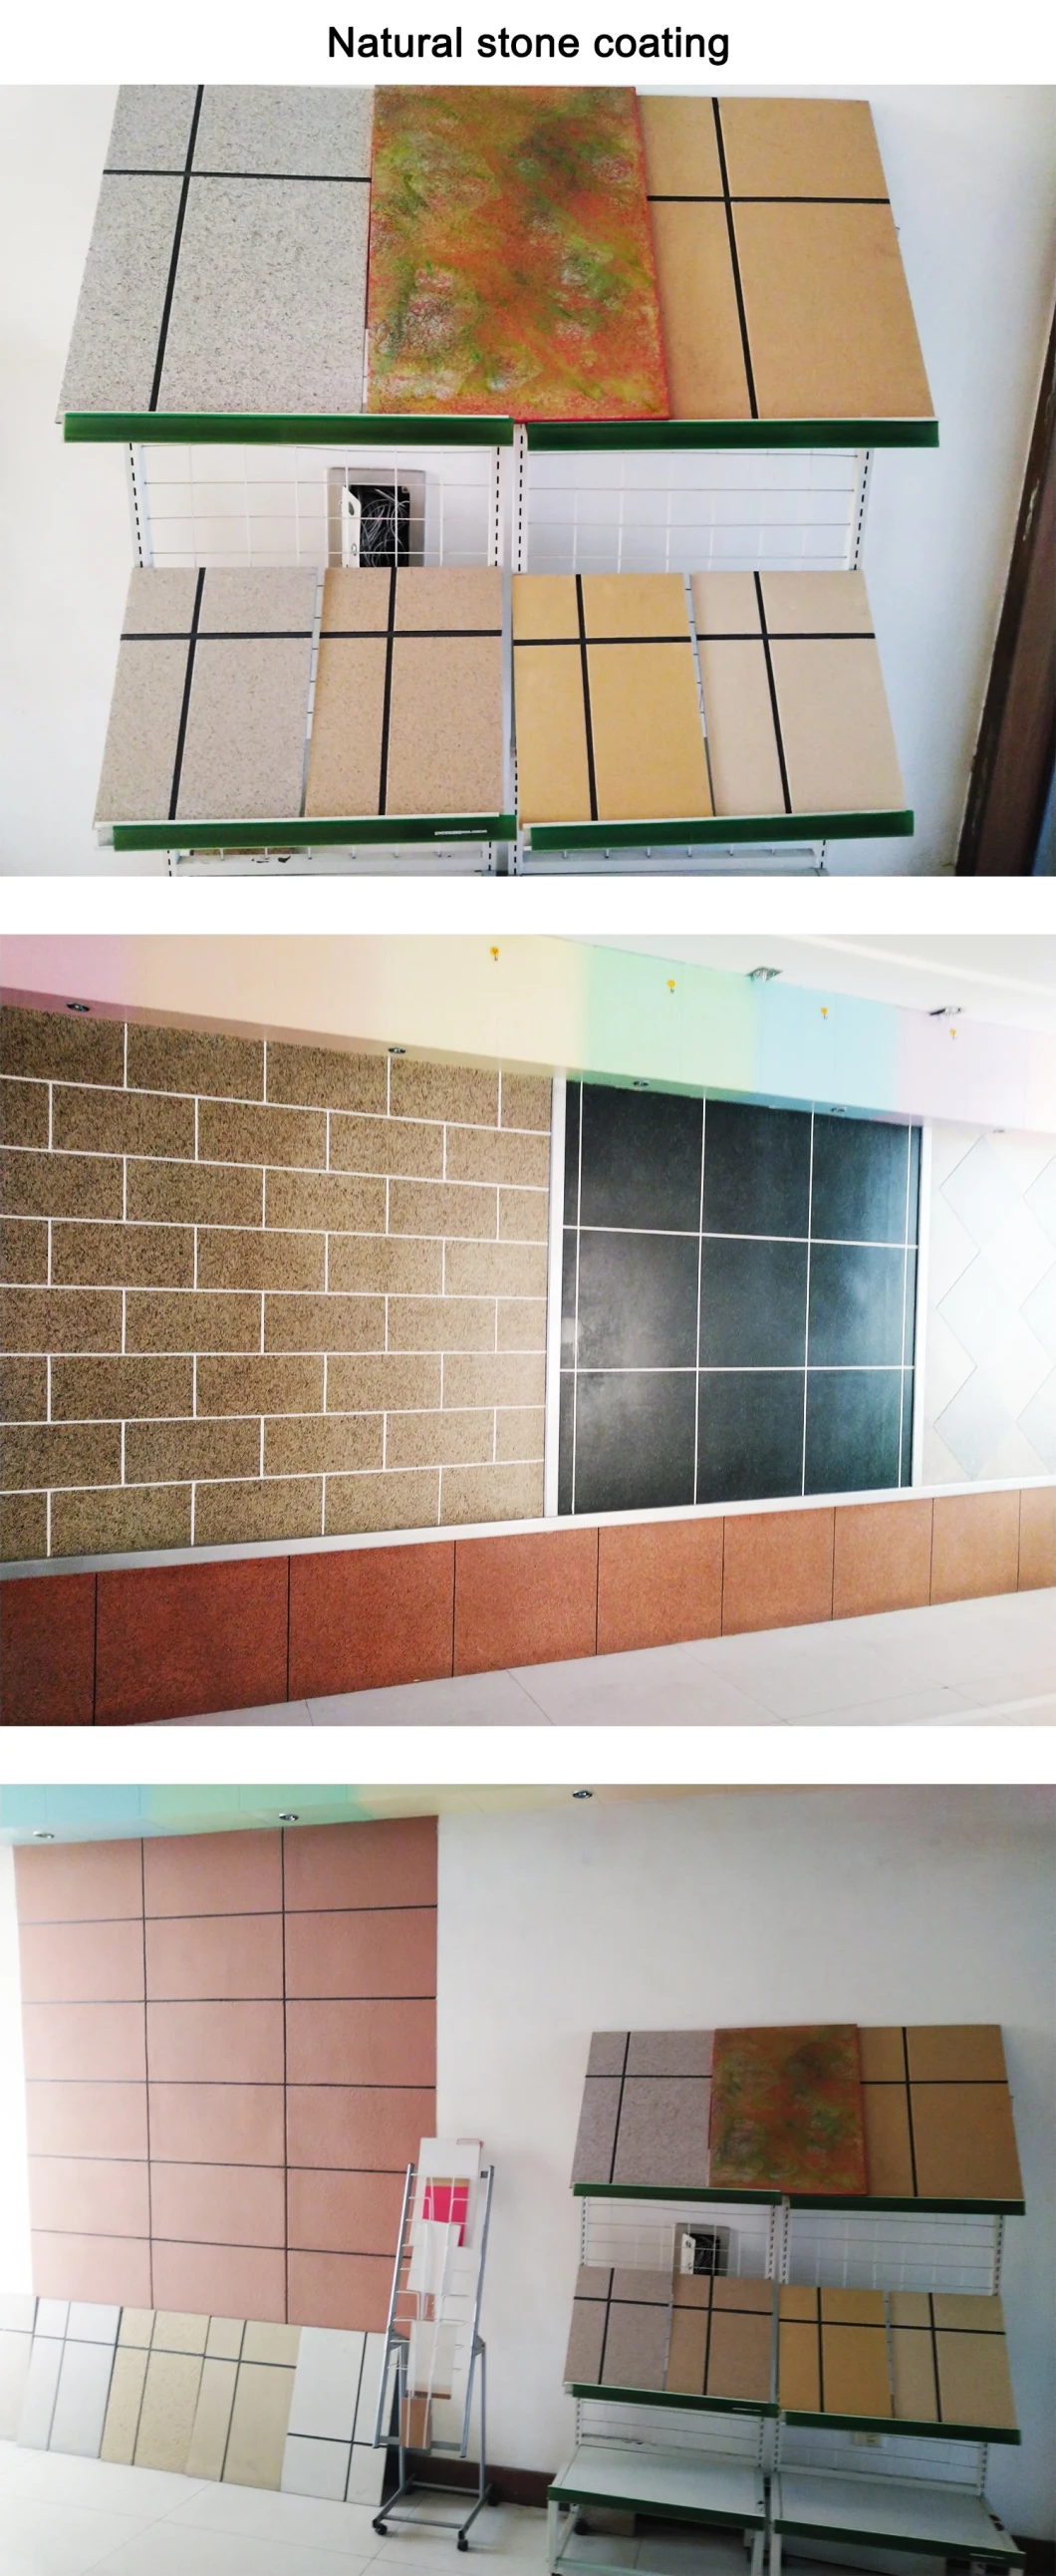 Water Based Acrylic Natural Stone Coating Used for Building Wall Paint